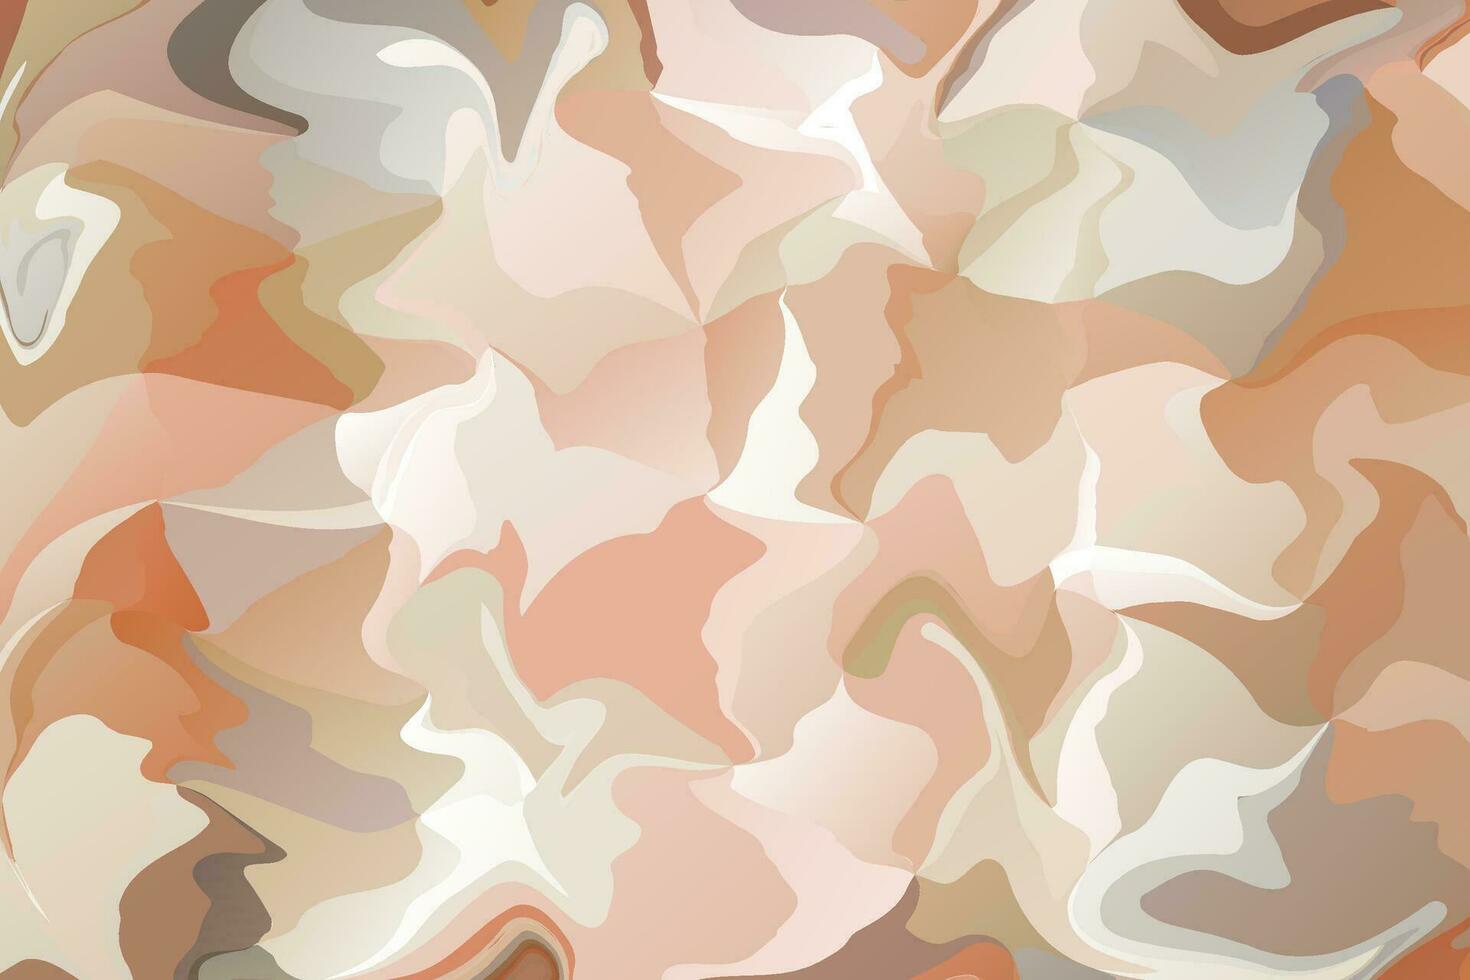 Camouflage Seamless Pattern. Camouflage Endless Repeats Surface. Vector Camo Fabric. Woodland Concept. Seamless Army Hunting Print. Extreme Style.